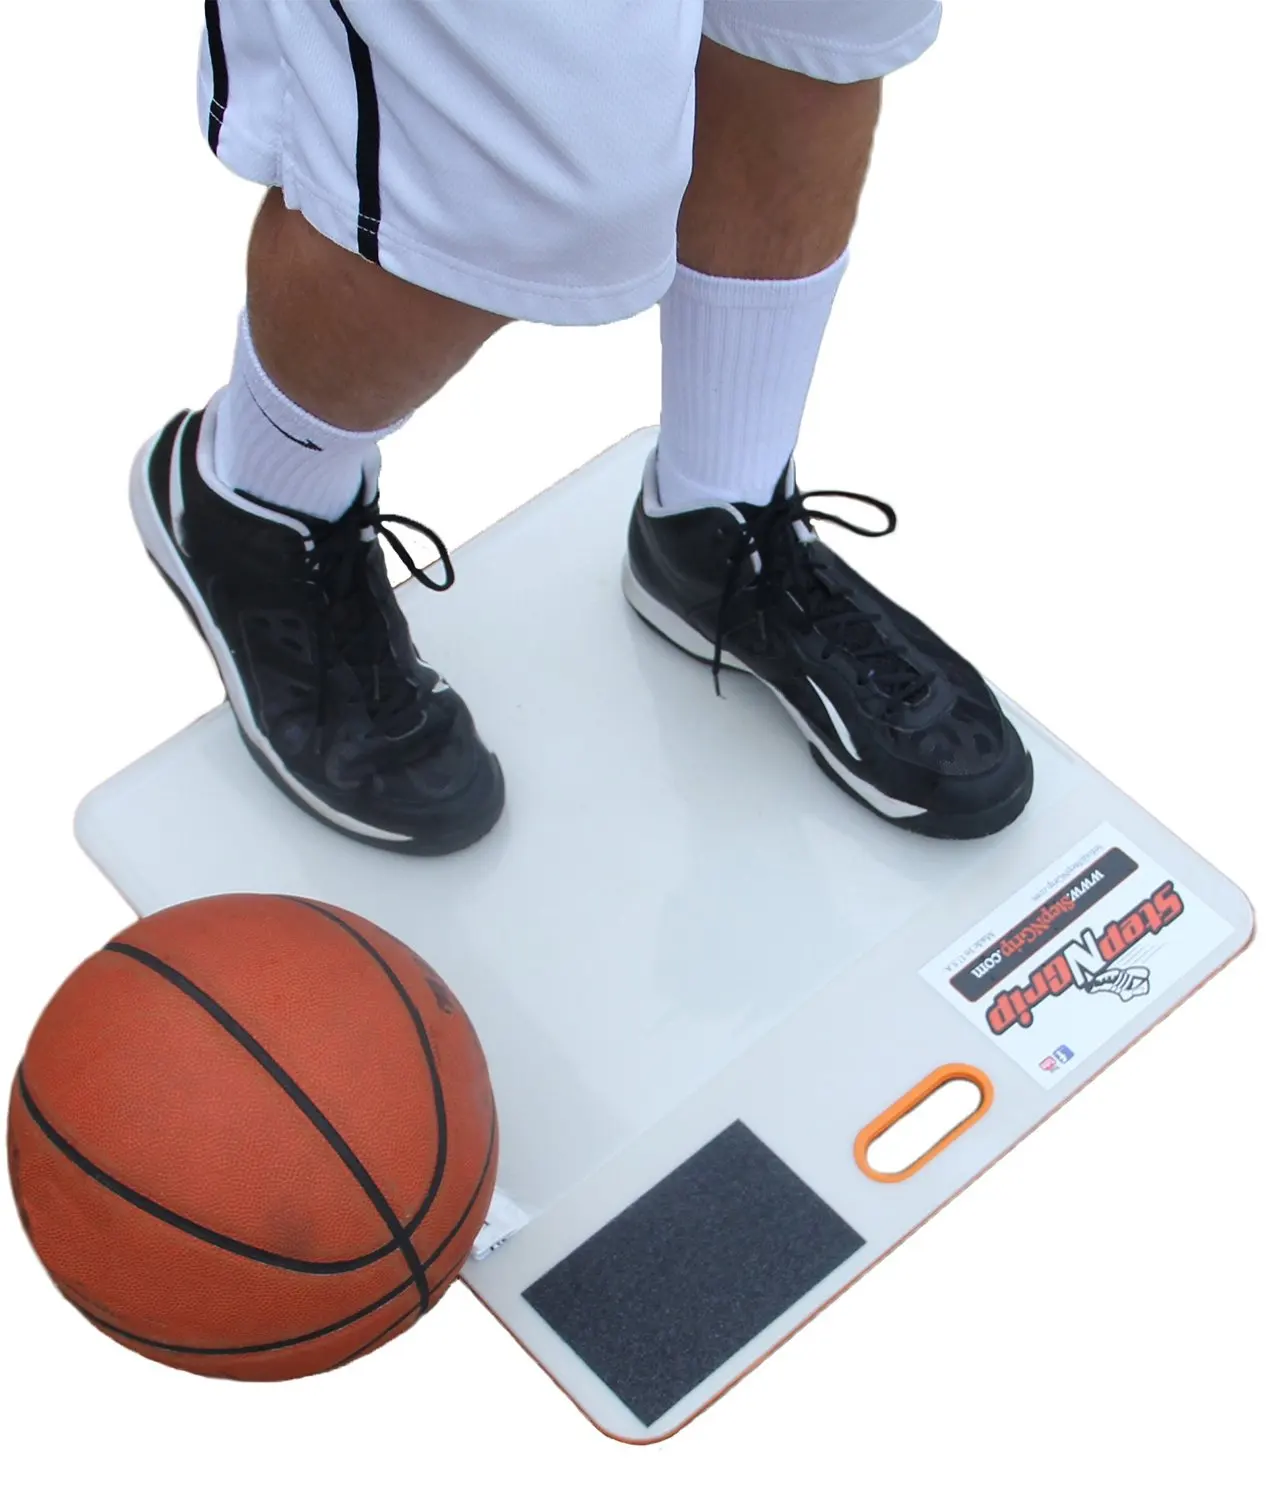 Sticky Stop Power. Basic Model with Sticky Mat Allows Court Grip for Basketball Volleyball Uses Replacement 15x 18 Sheets StepNGrip Model Courtside Shoe Grip Traction Mat